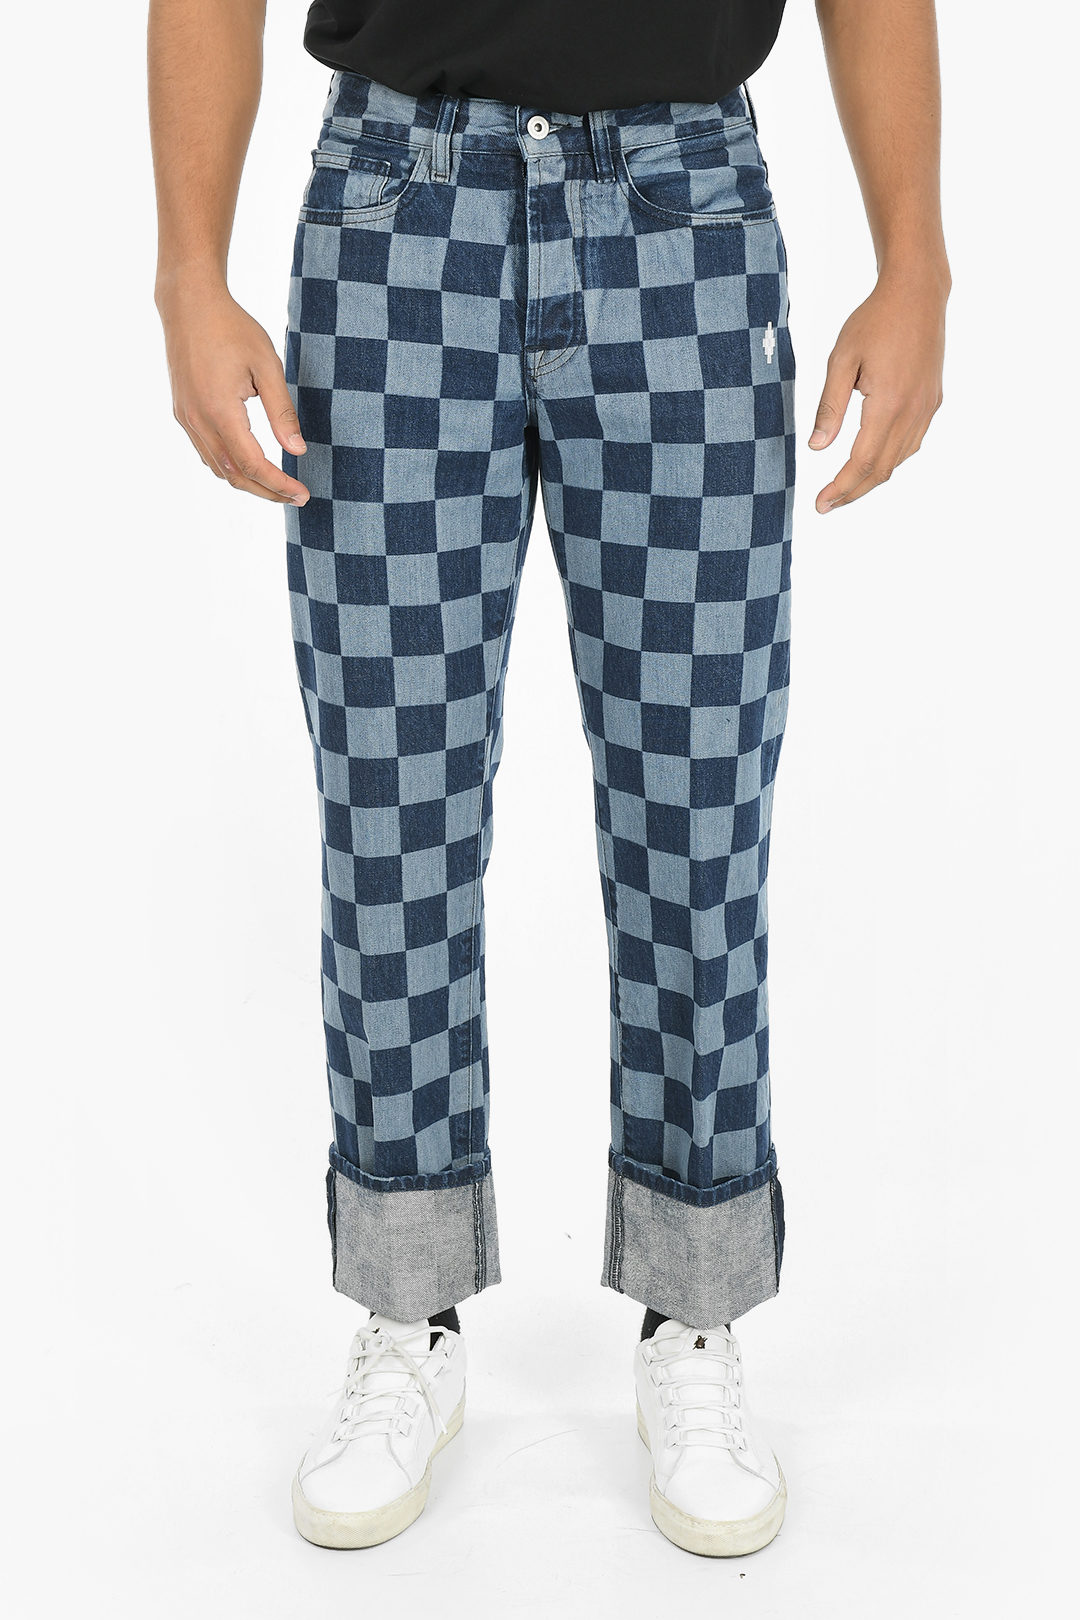 Buy Checkered Pattern Pants, Black and White Checkered Joggers With  Pockets, Checkers, Gym Pants, Sweatpants Men's Joggers Online in India -  Etsy